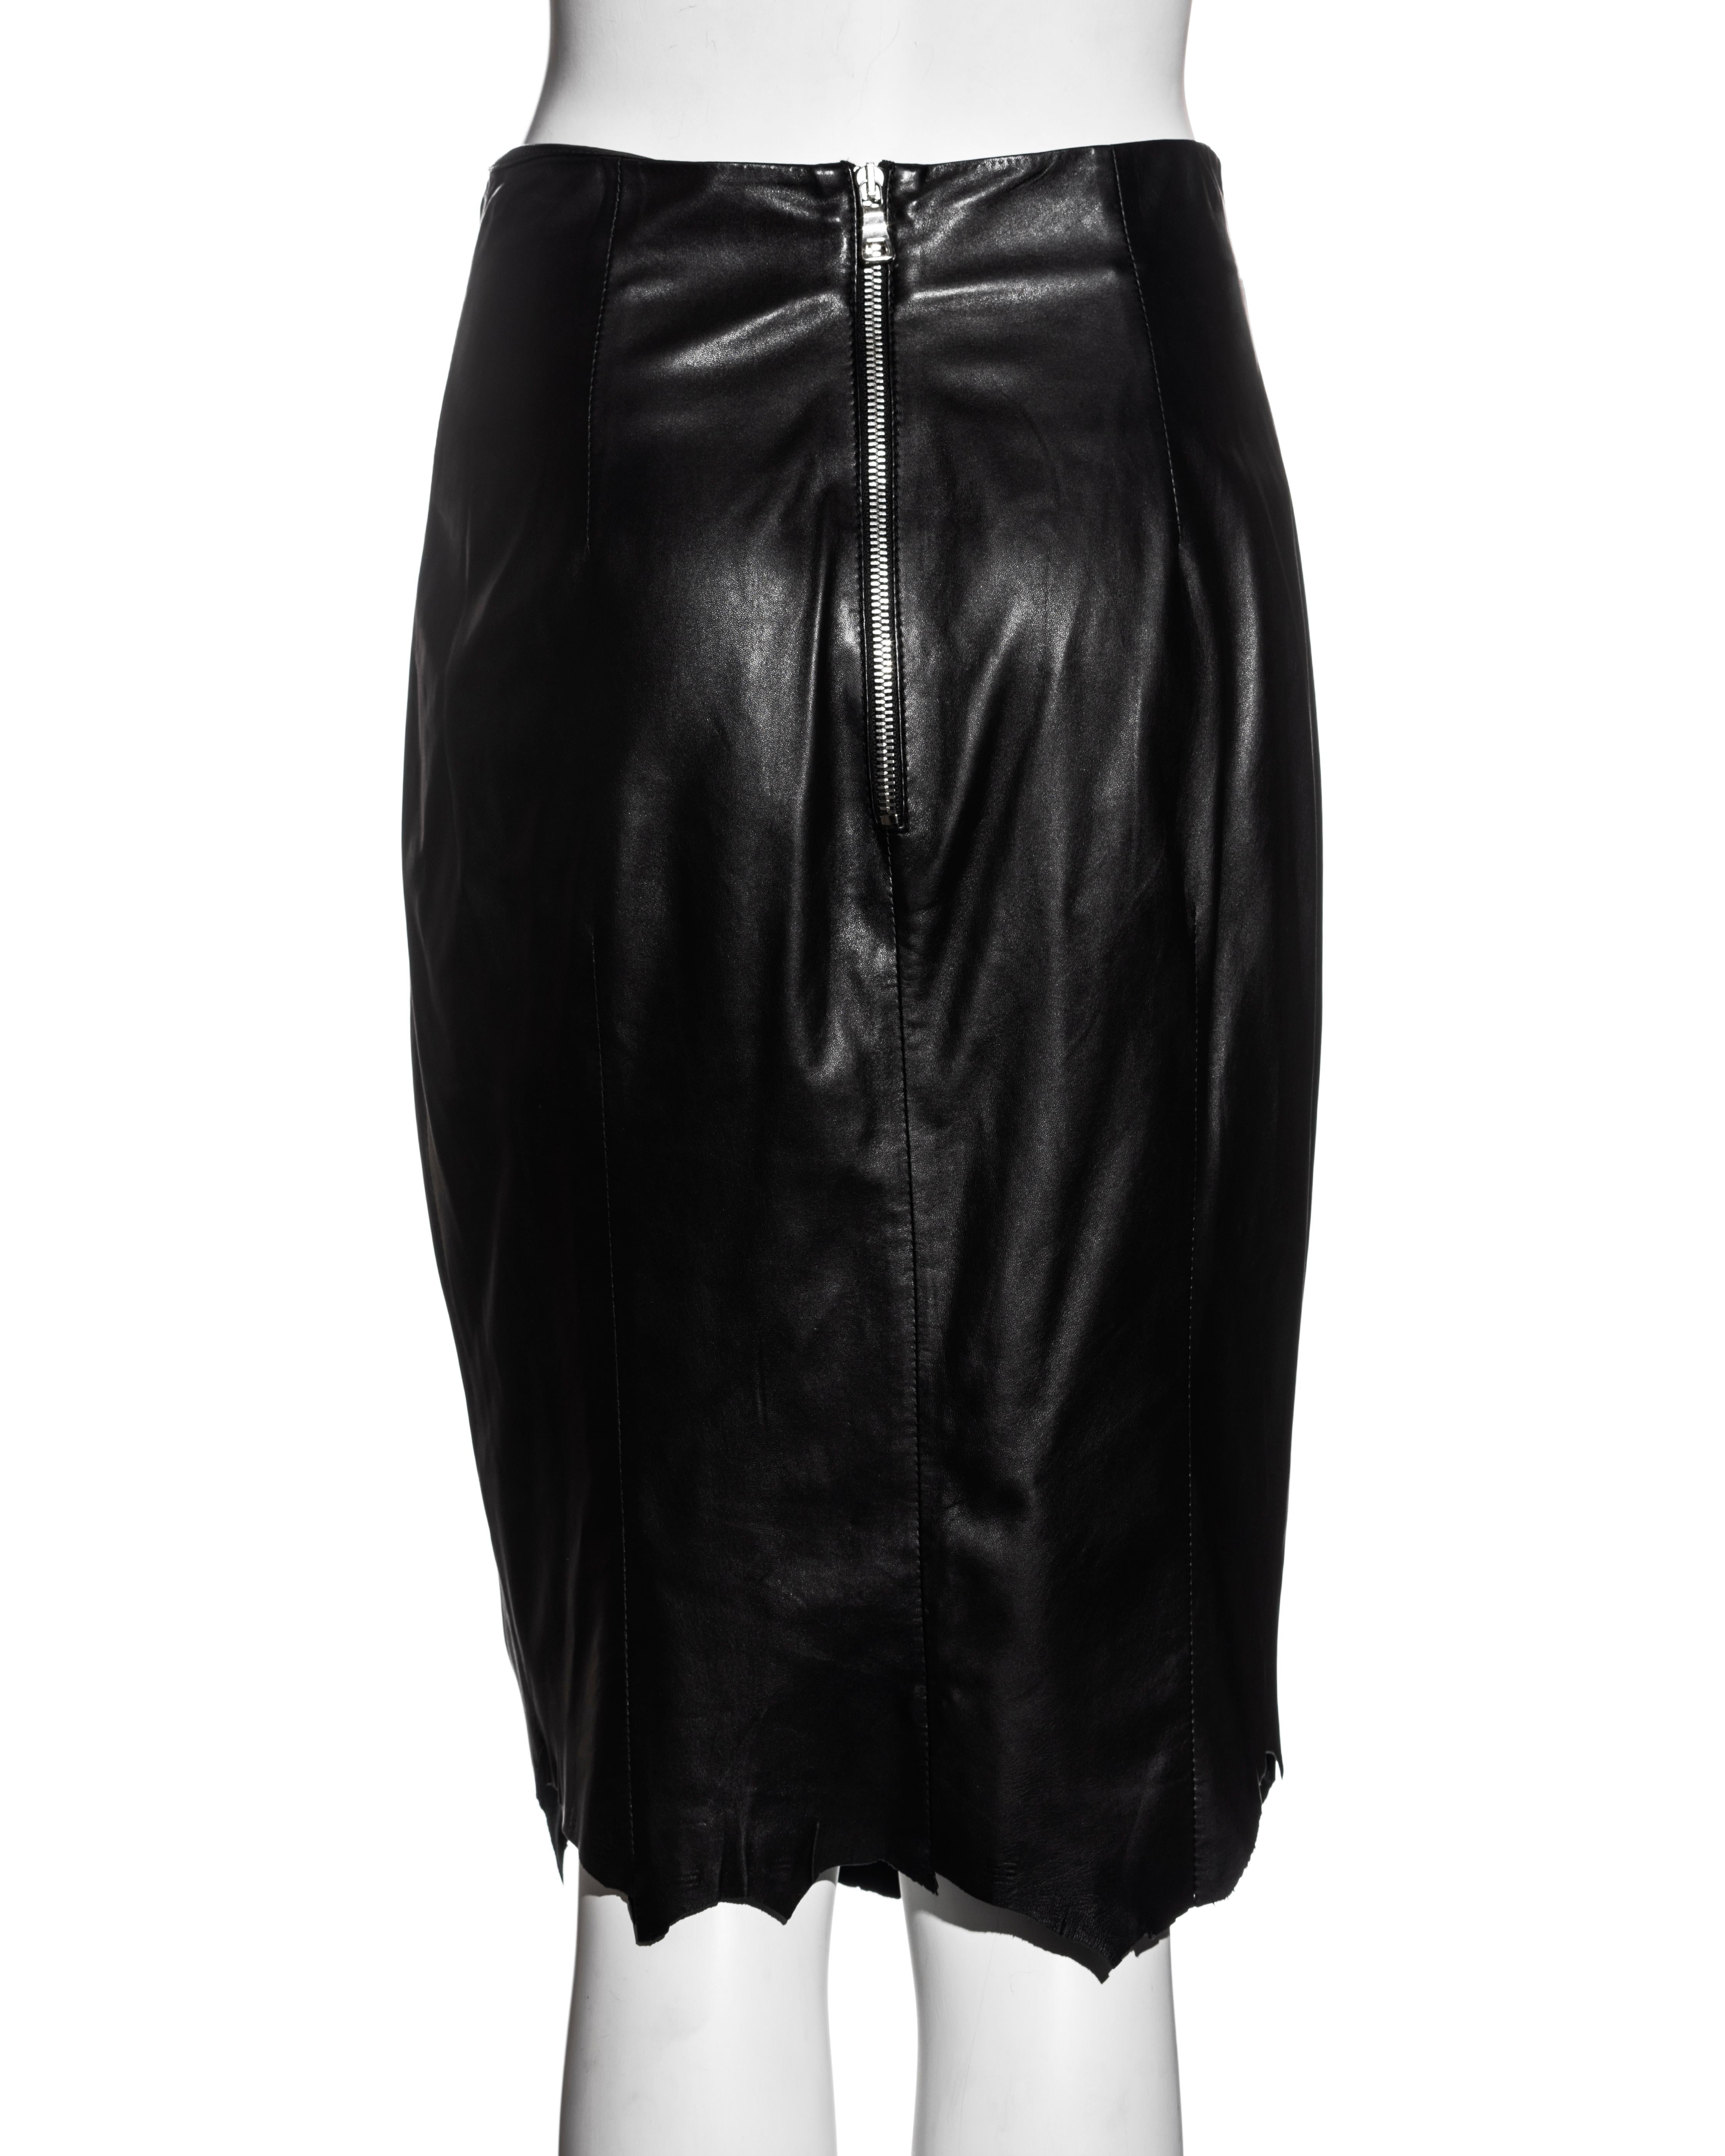 Balmain by Christophe Decarnin black leather safety-pin skirt, ss 2011 For Sale 1